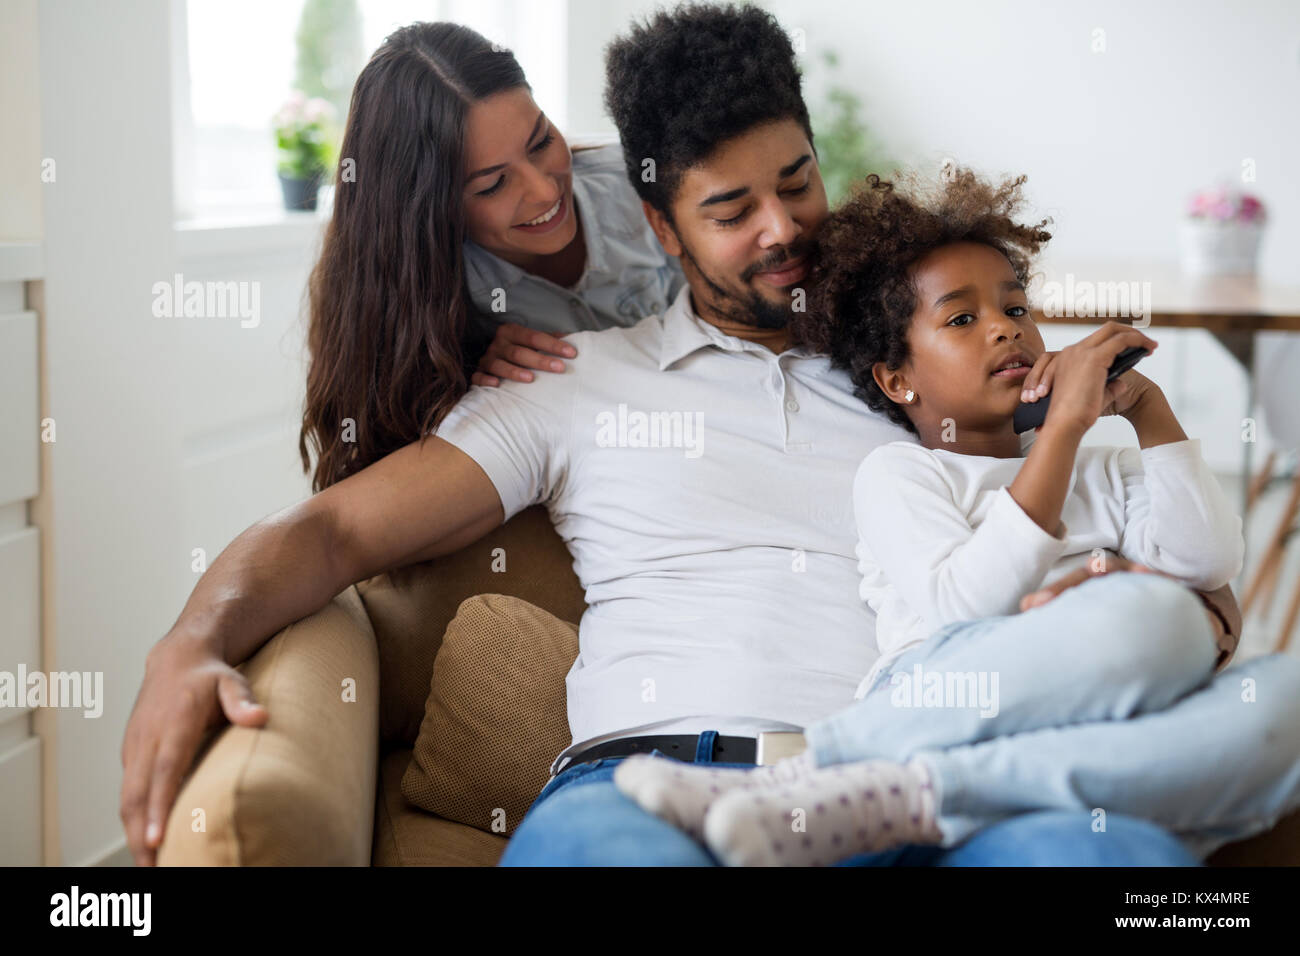 Young family being playful at home Stock Photo